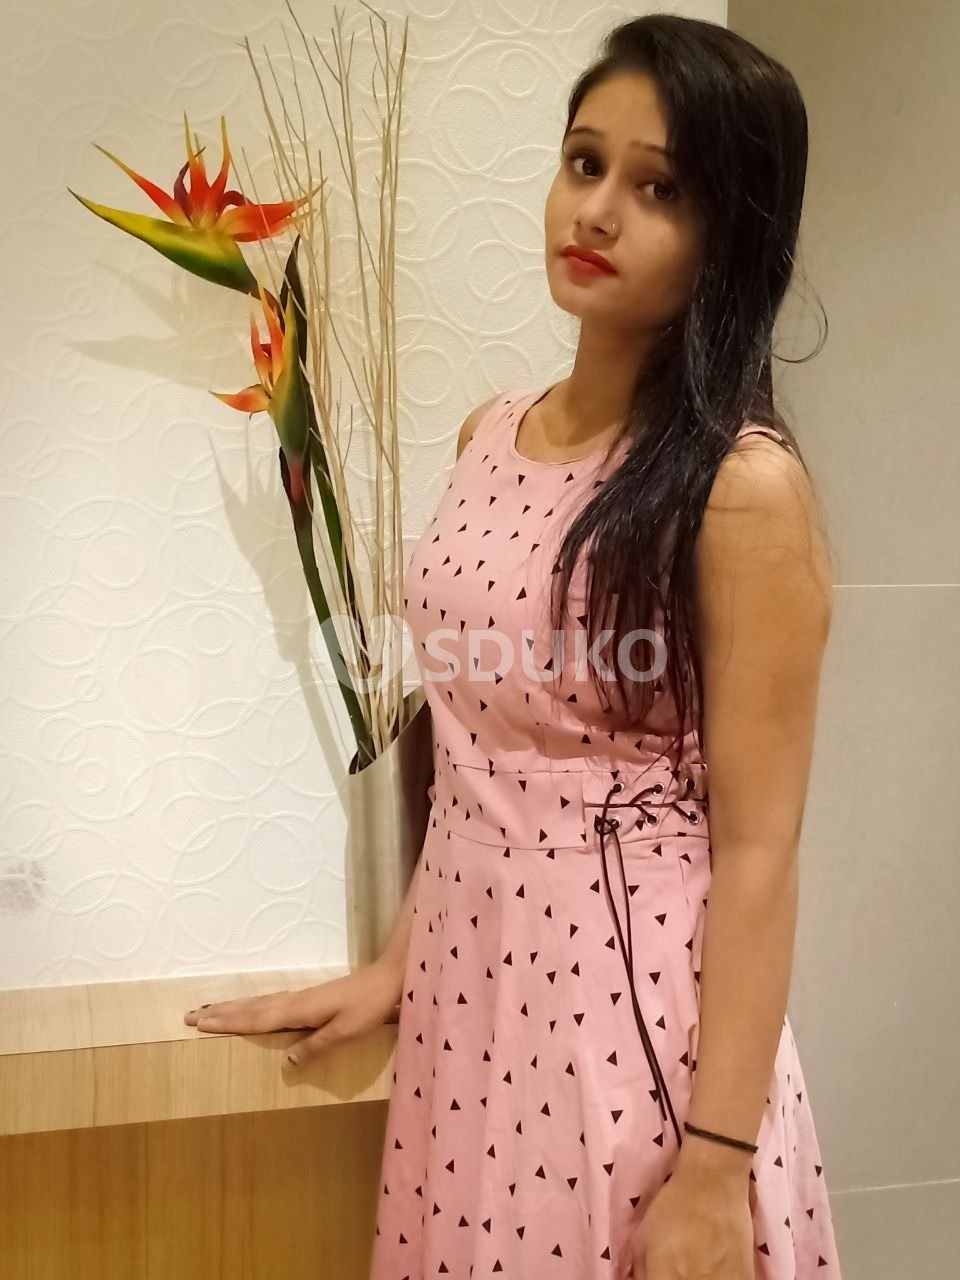 SPECIAL SECUNDERABAD DOORSTEP HIGH PROFESSIONAL DIVYA Escorts AGENCY TOP MODEL PROVIDED. BOOK NOW